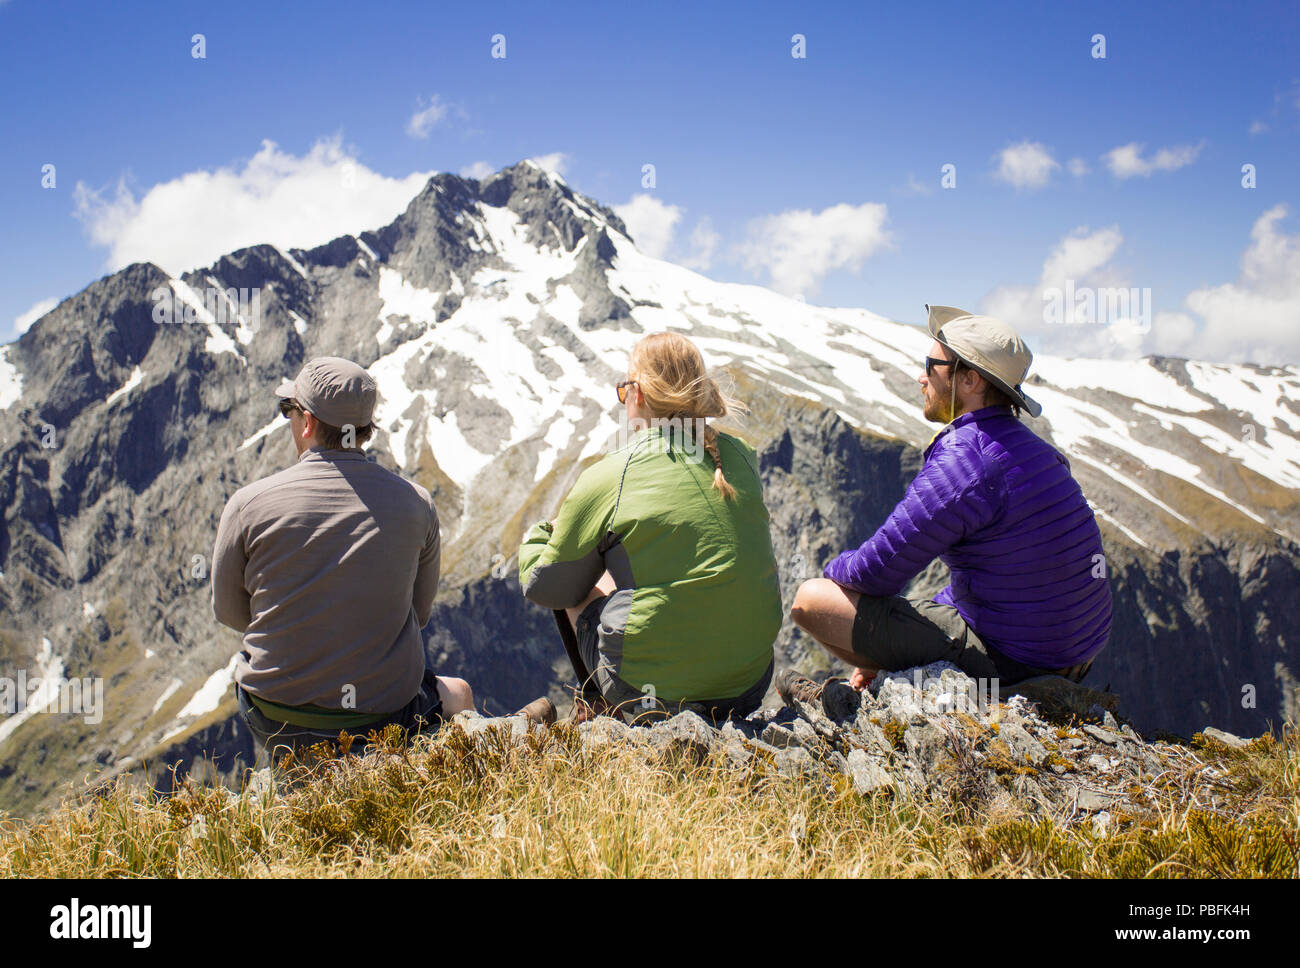 New Zealand aka Aotearoa, South Island, Mt Aspiring National Park, Gillespie Pass, group looking out at mountains. Model released. Stock Photo